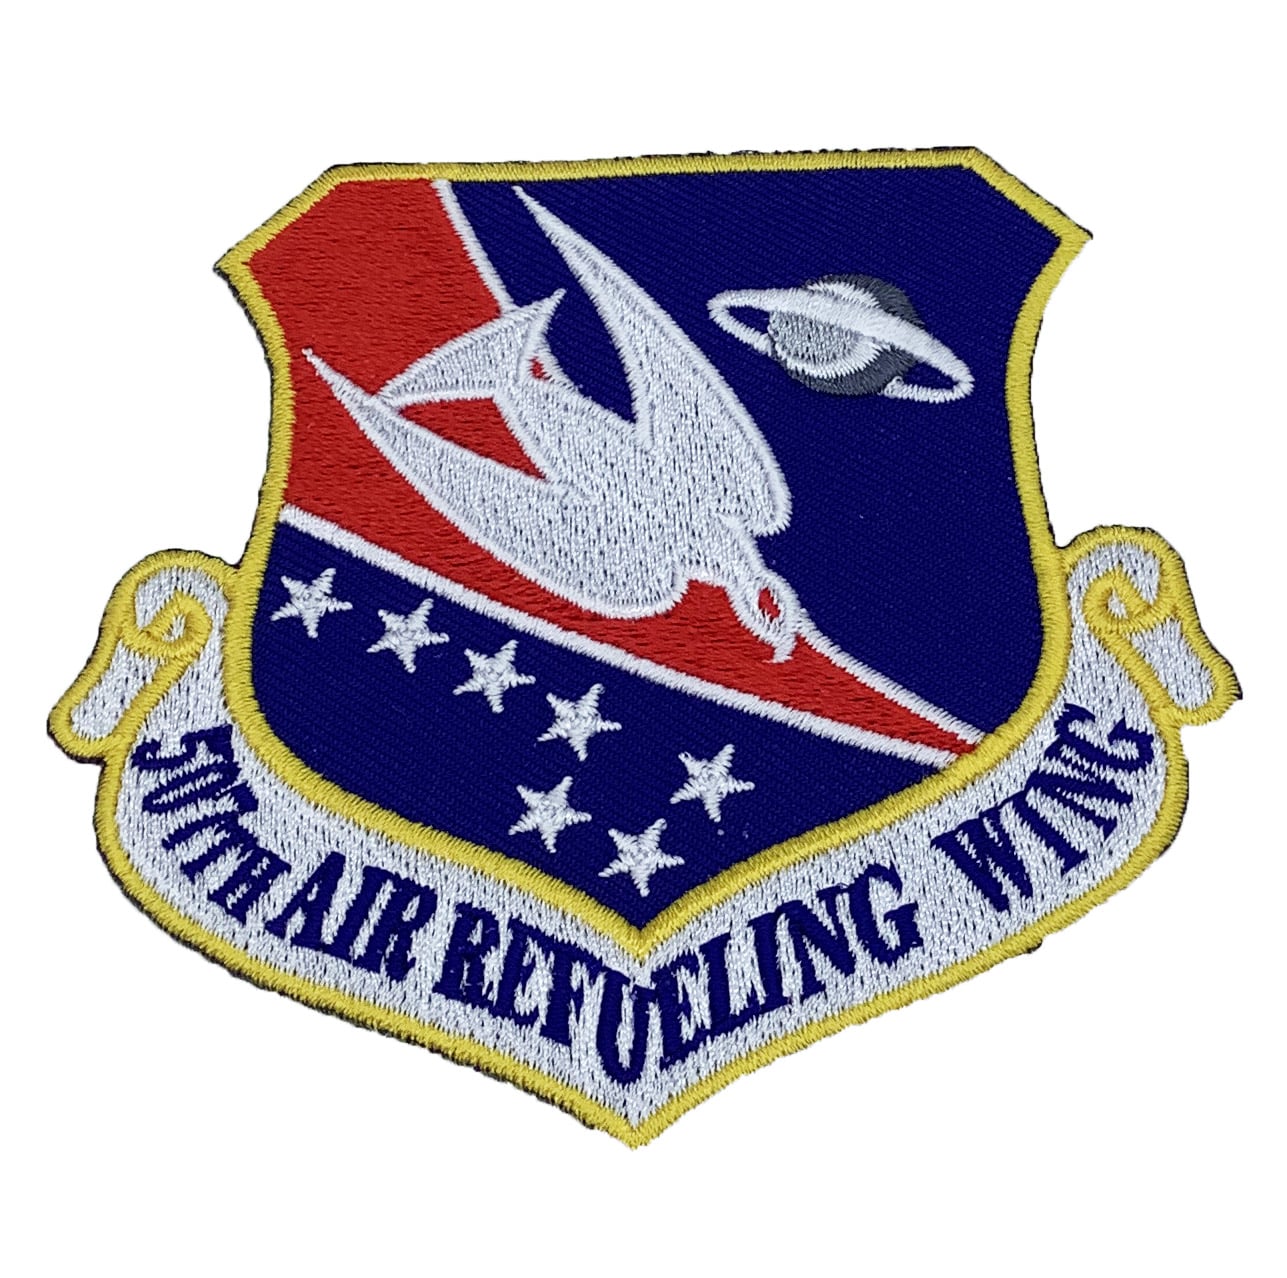 507th Air Refueling Wing Patch – Plastic Backing